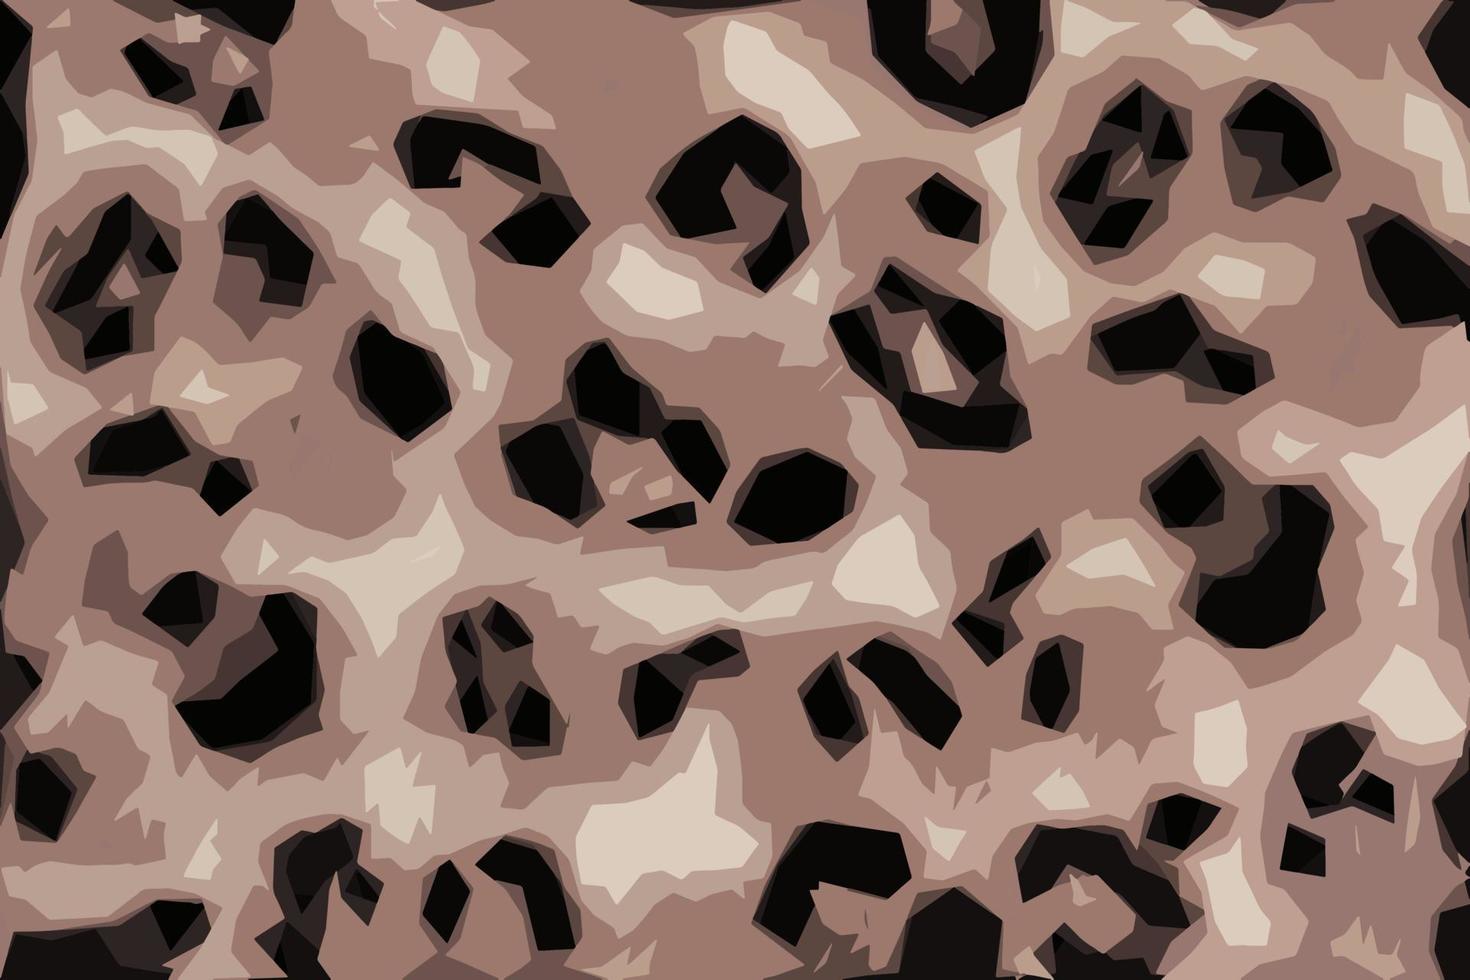 Realistic closeup vector illustration of fleece fabric with leopard pattern. Brown-beige and black striped repeating on the surface of fur clothes, abstract texture background.